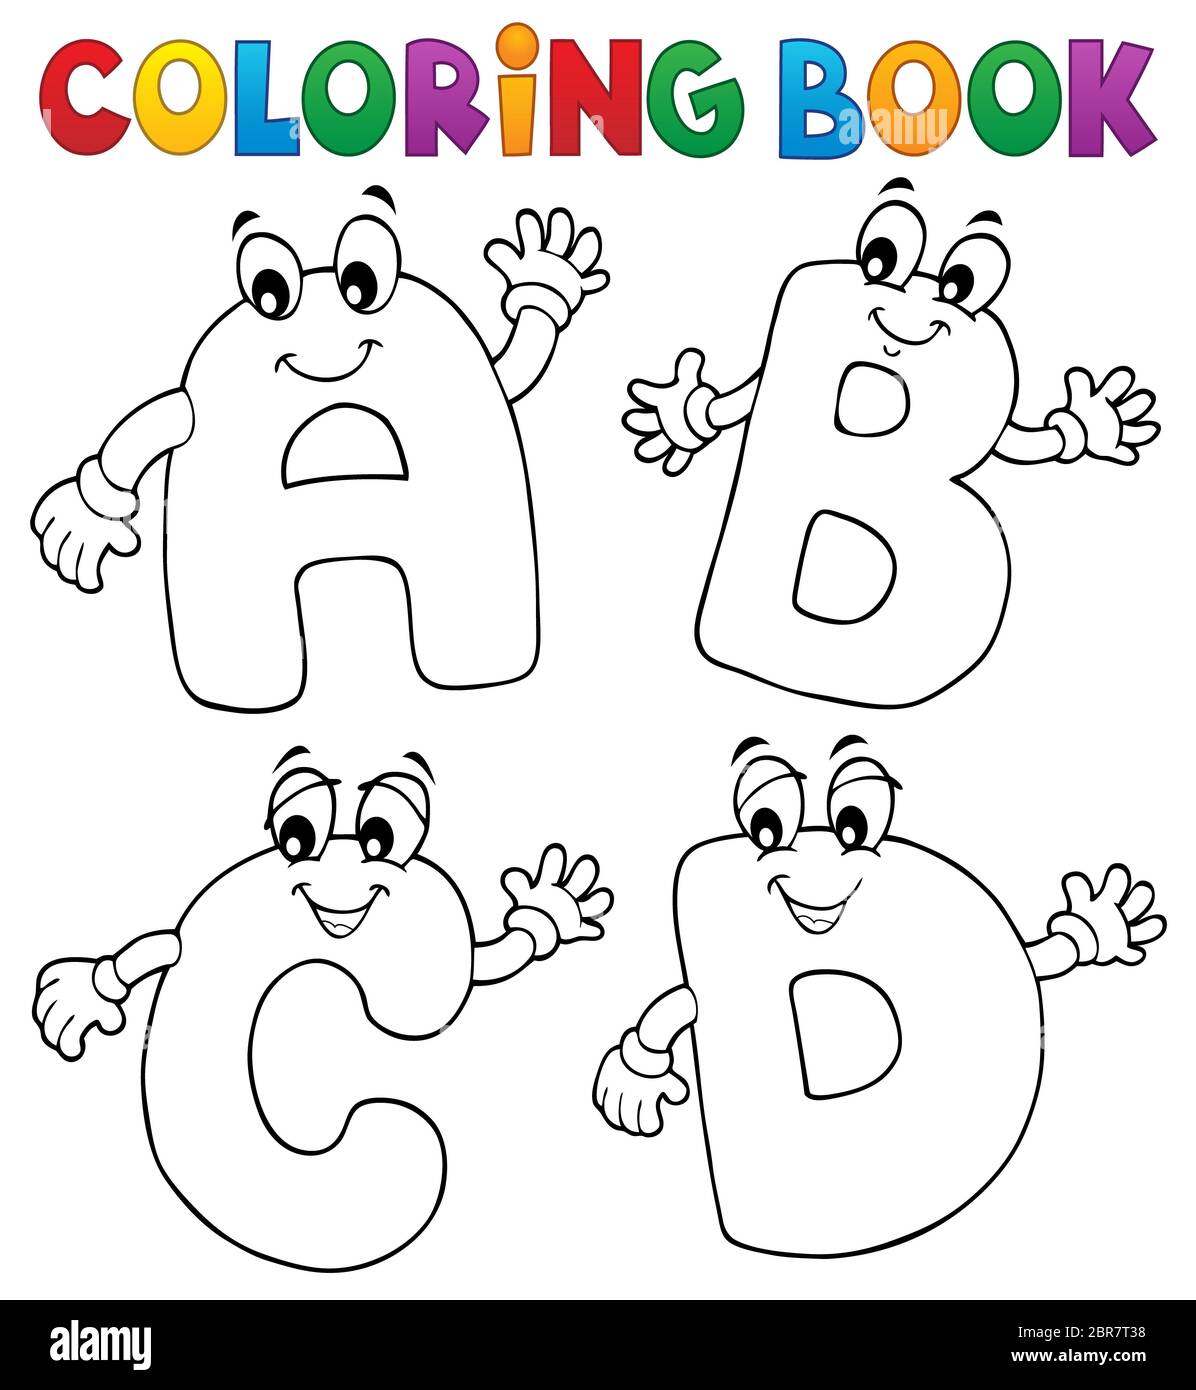 Coloring book cartoon ABCD letters 2 - picture illustration Stock Photo -  Alamy